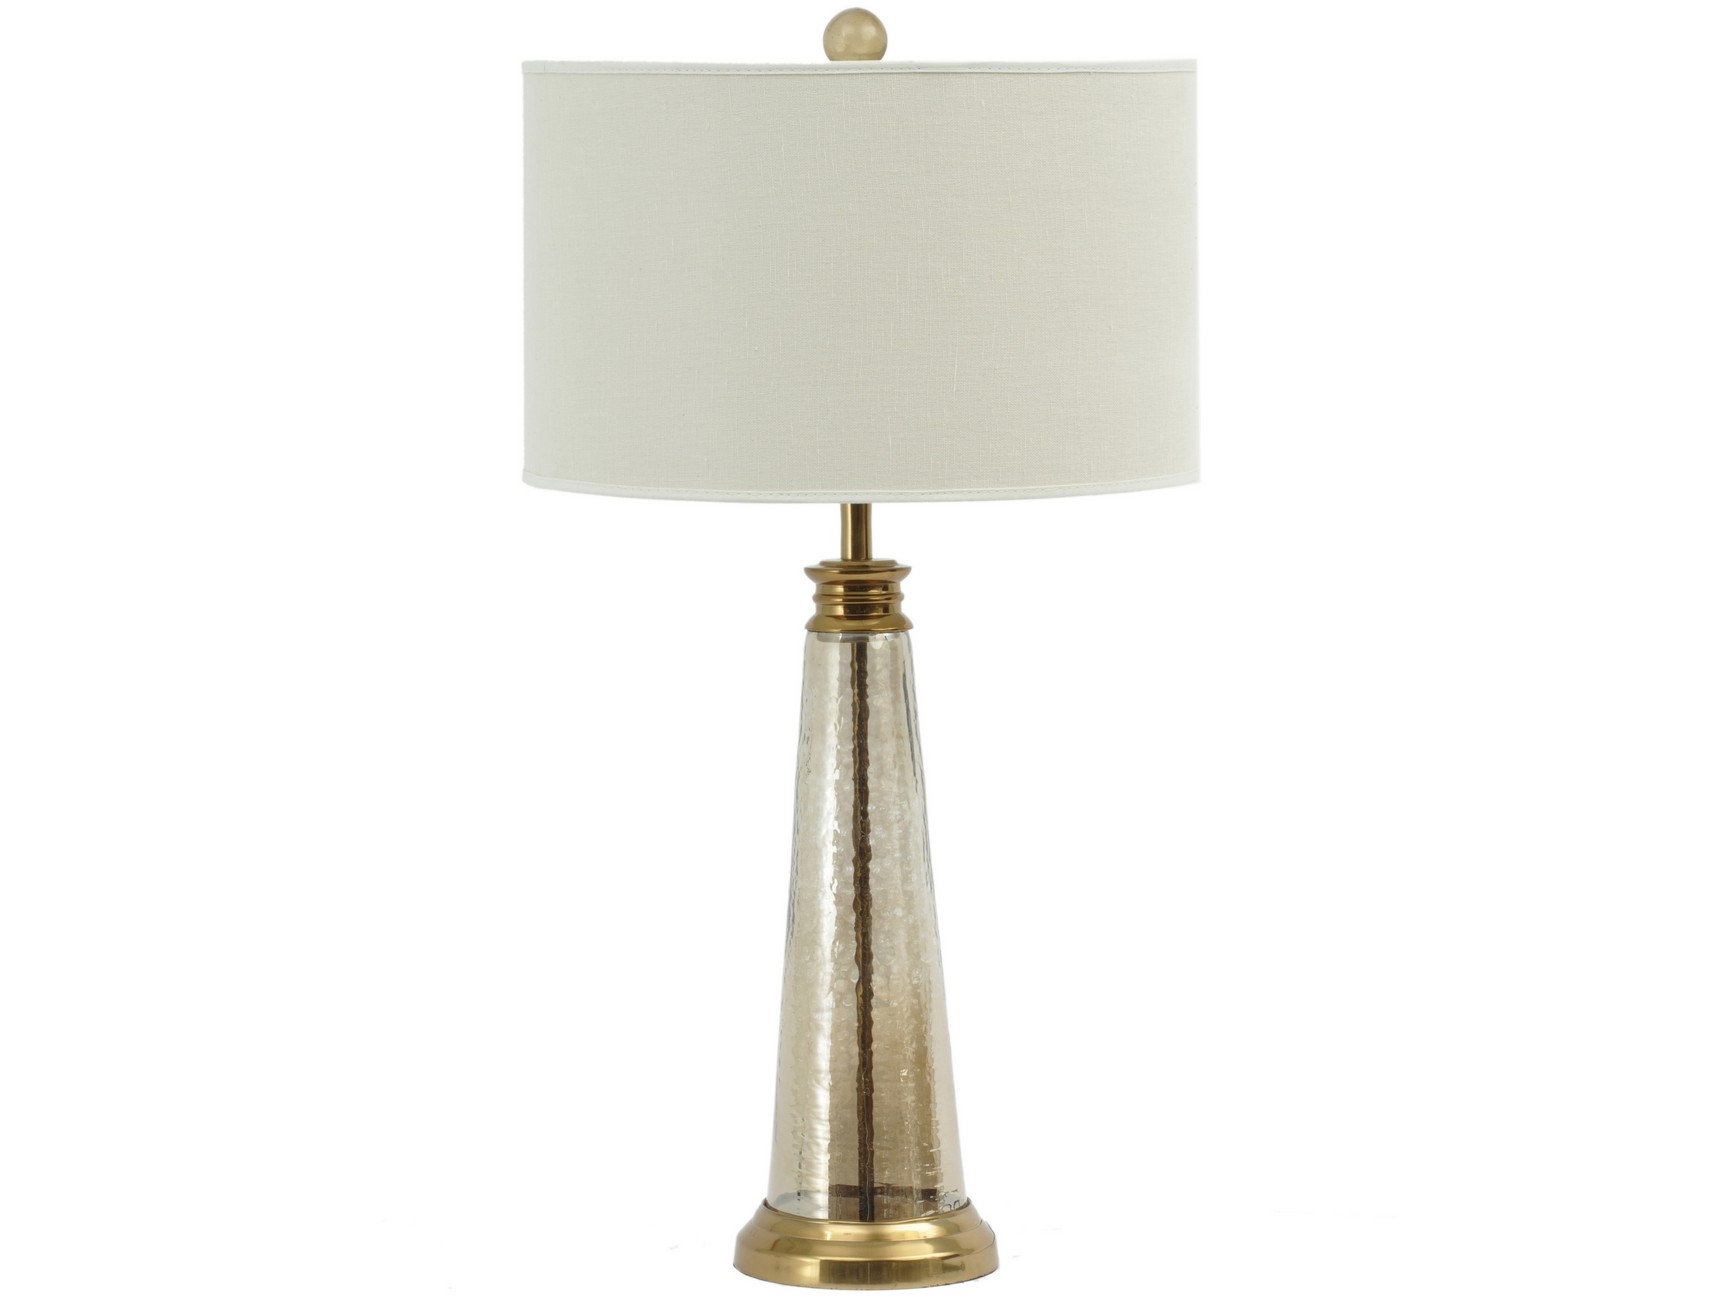 Regal Antique Brass And Glass Table, Antique Brass And Glass Table Lamps Uk